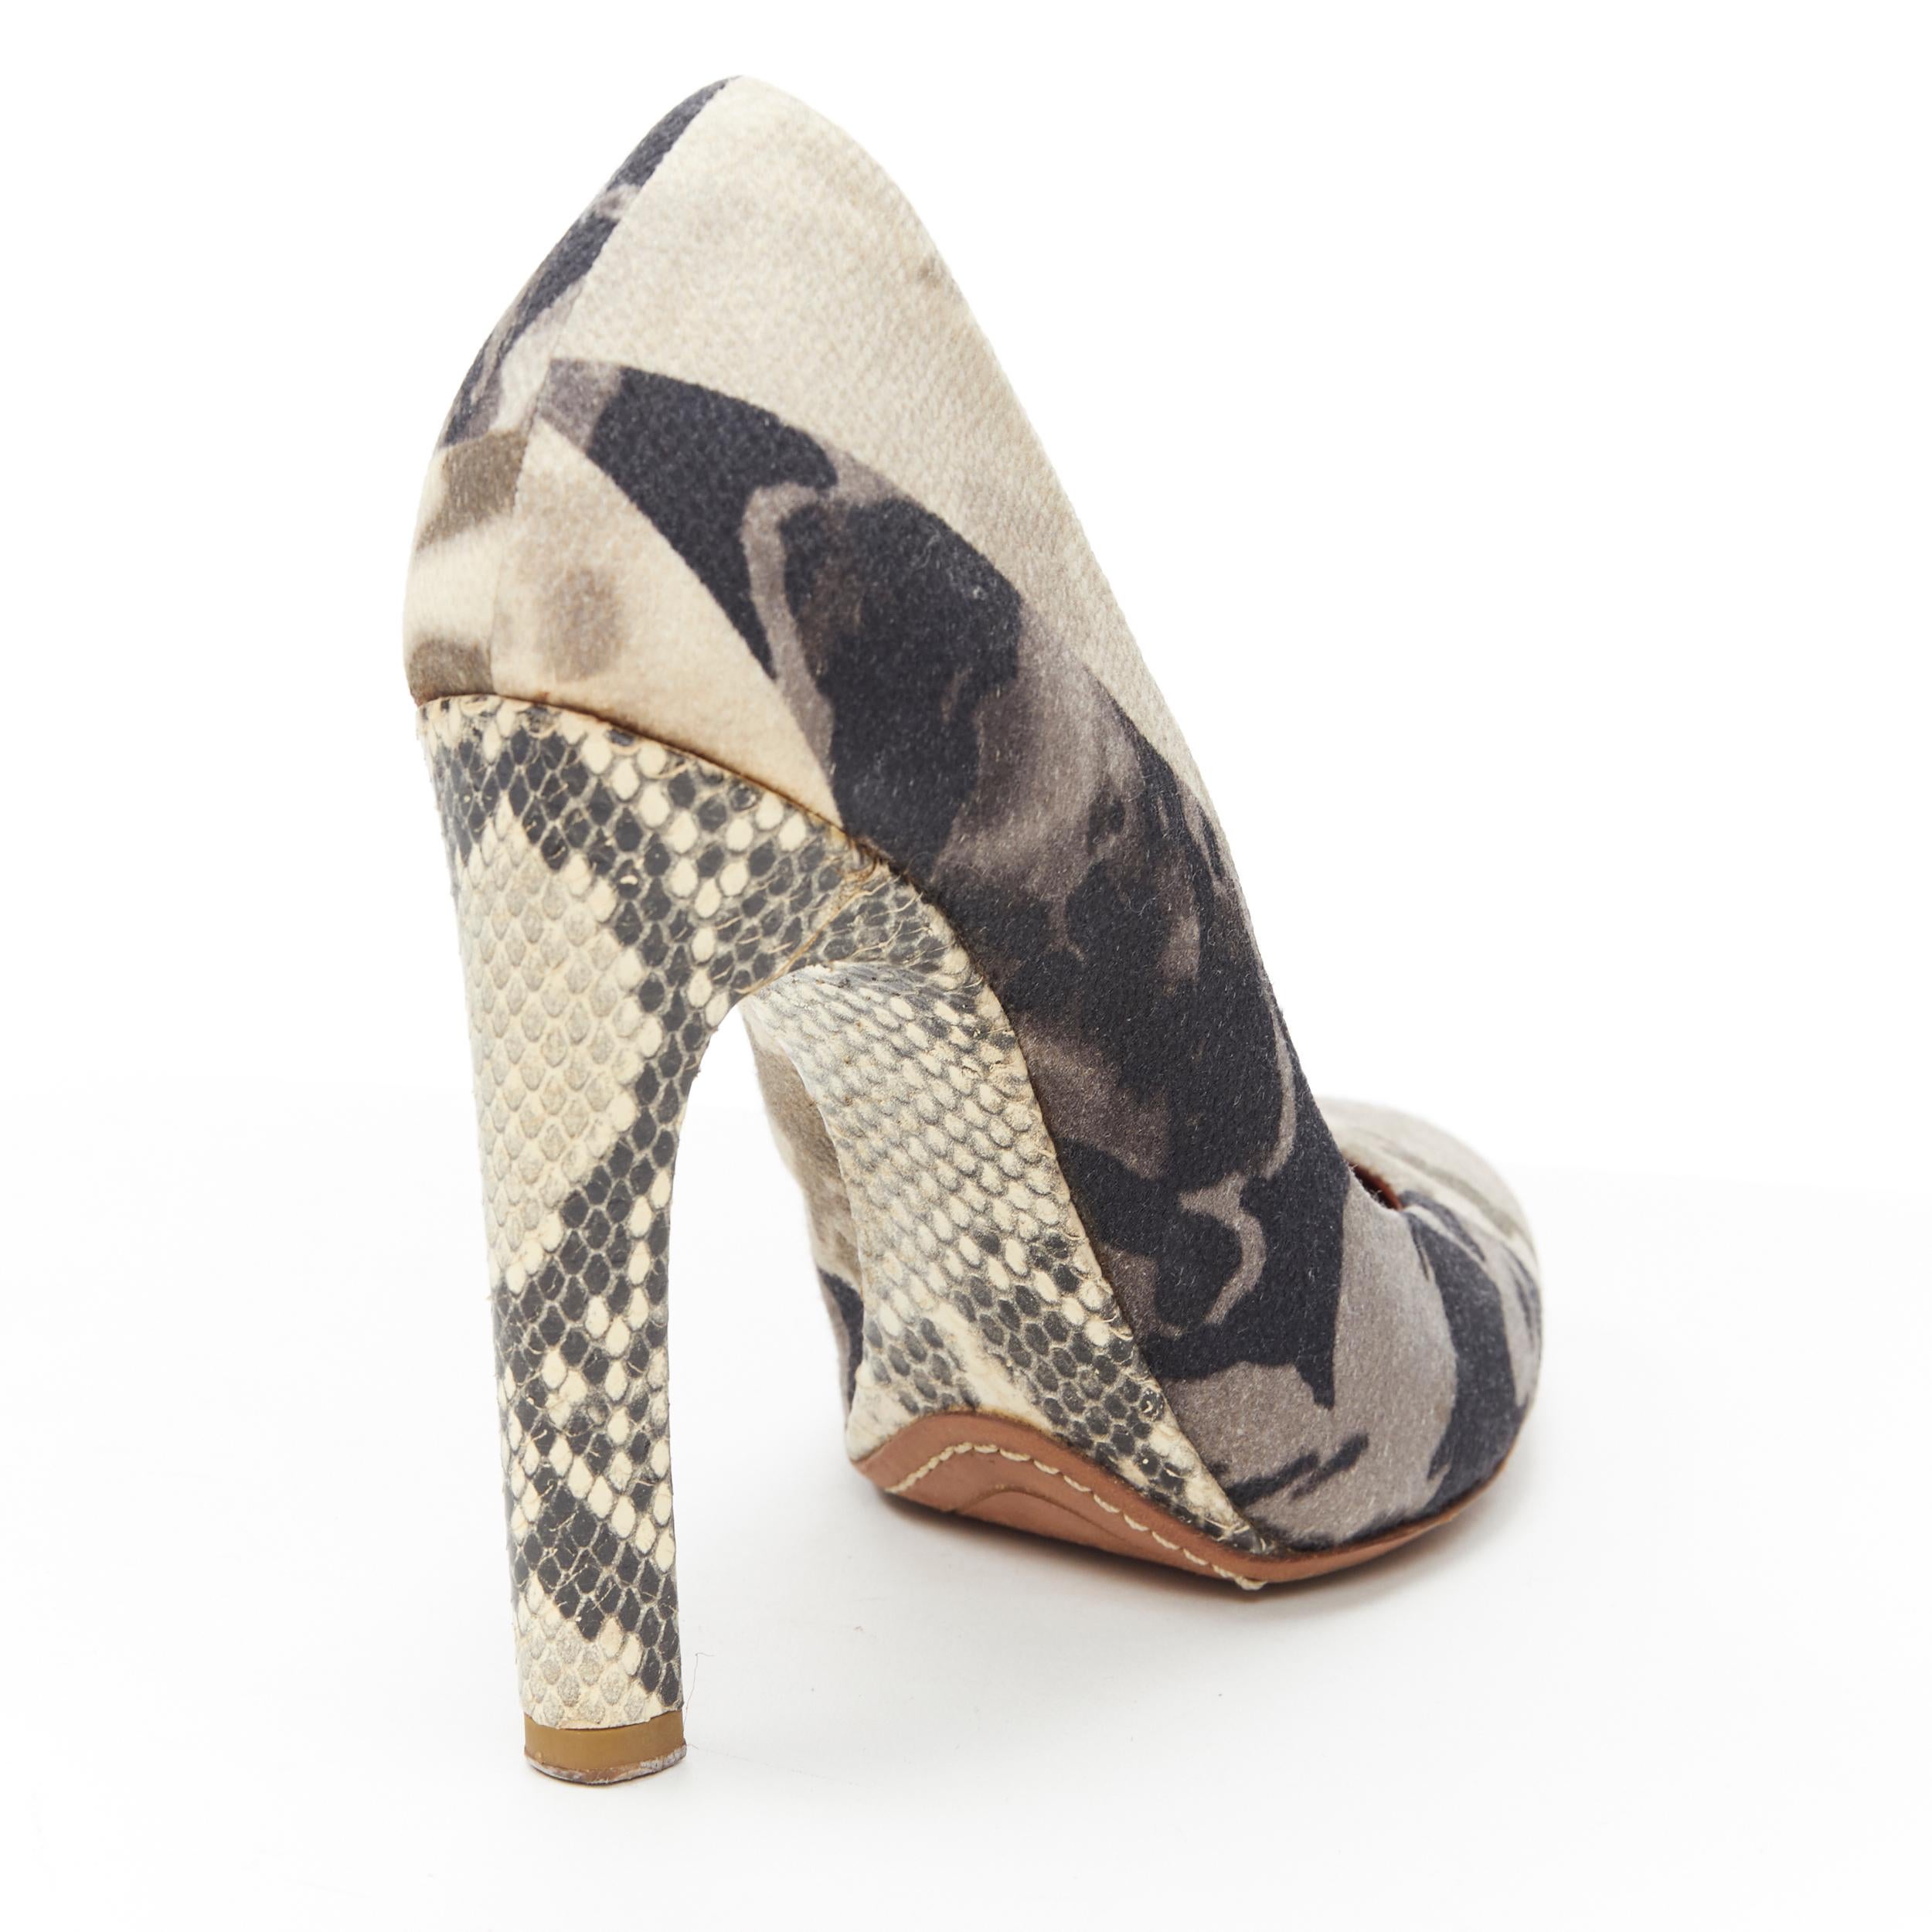 DRIES VAN NOTEN green camouflage print snake leather high heel pump EU36 
Reference: EACN/A00103 
Brand: Dries Van Noten 
Designer: Dries Van Noten 
Material: Fabric 
Color: Grey 
Pattern: Camouflage 
Extra Detail: Grey camouflage print upper.